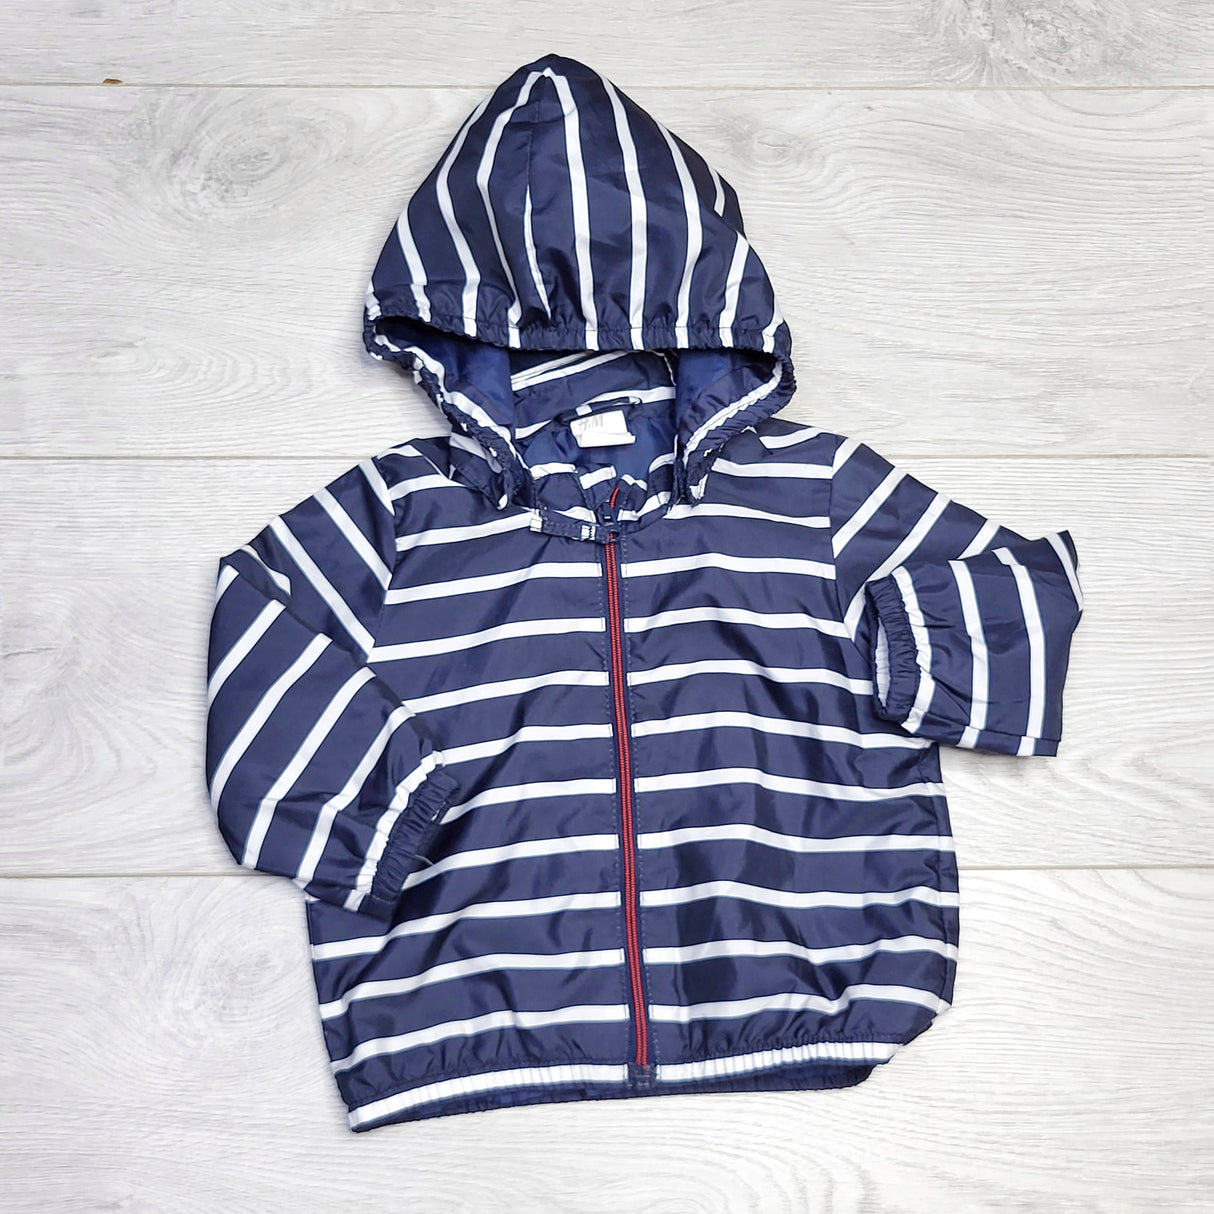 RZA2 - H and M navy striped hooded windbreaker jacket. Size 4-6 months